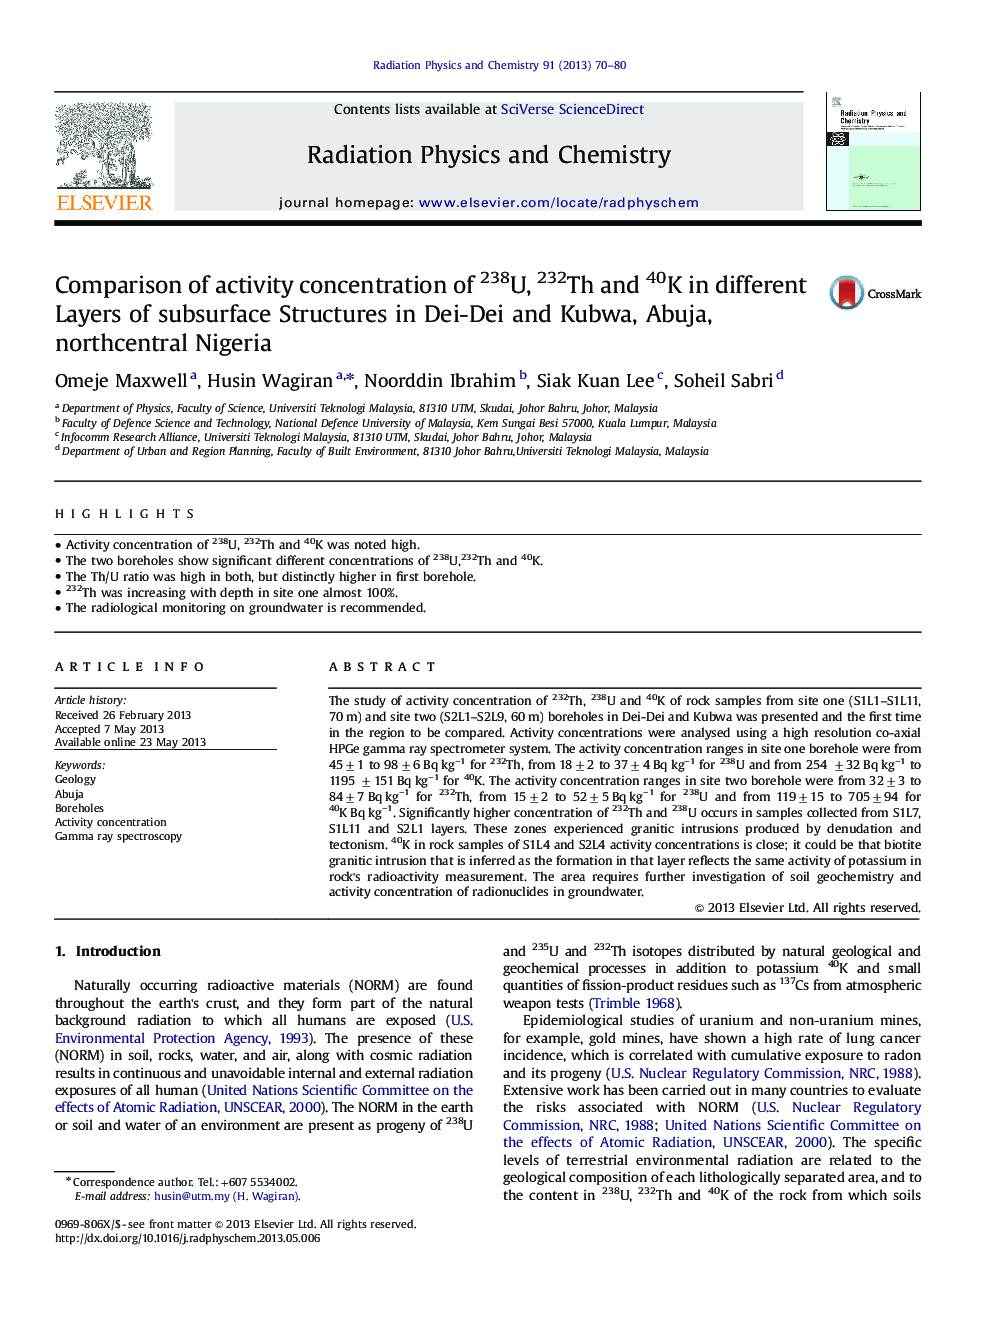 Comparison of activity concentration of 238U, 232Th and 40K in different Layers of subsurface Structures in Dei-Dei and Kubwa, Abuja, northcentral Nigeria